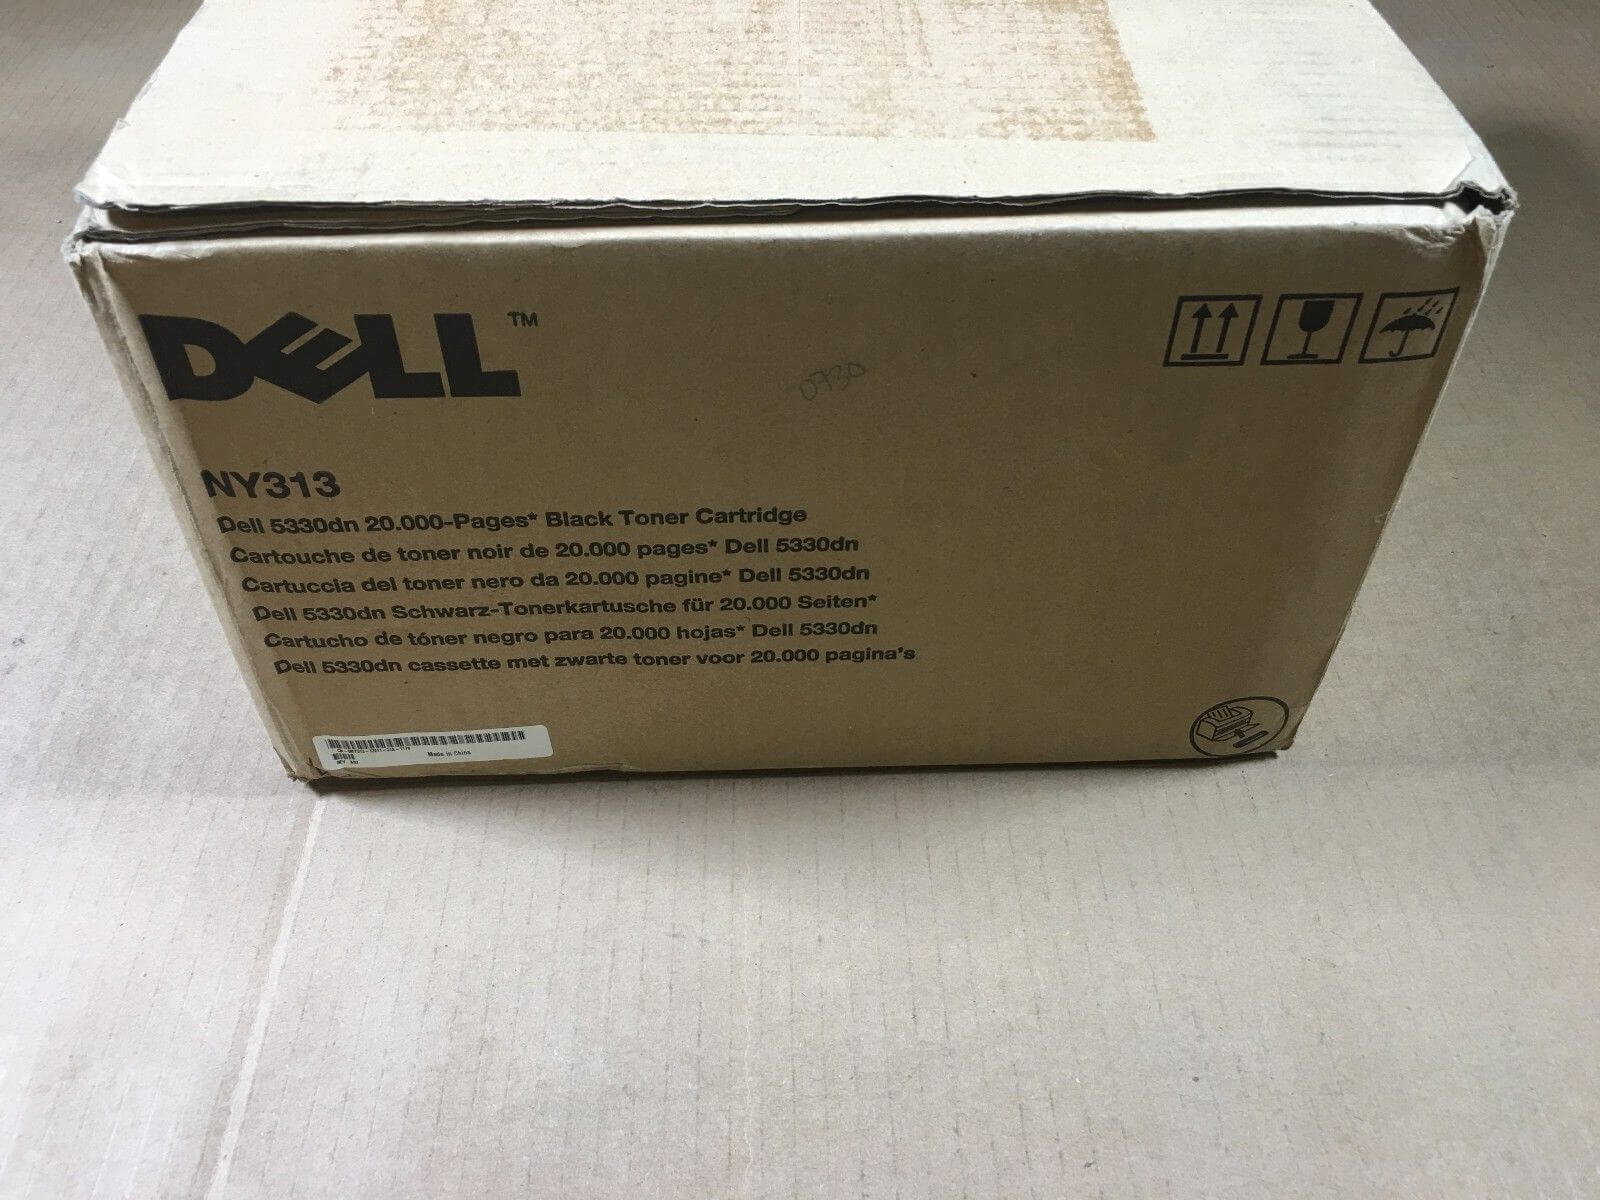 Genuine Dell NY313 Black Toner Cartridge 5330dn 20,000 Pages Same Day Shipping - copier-clearance-center